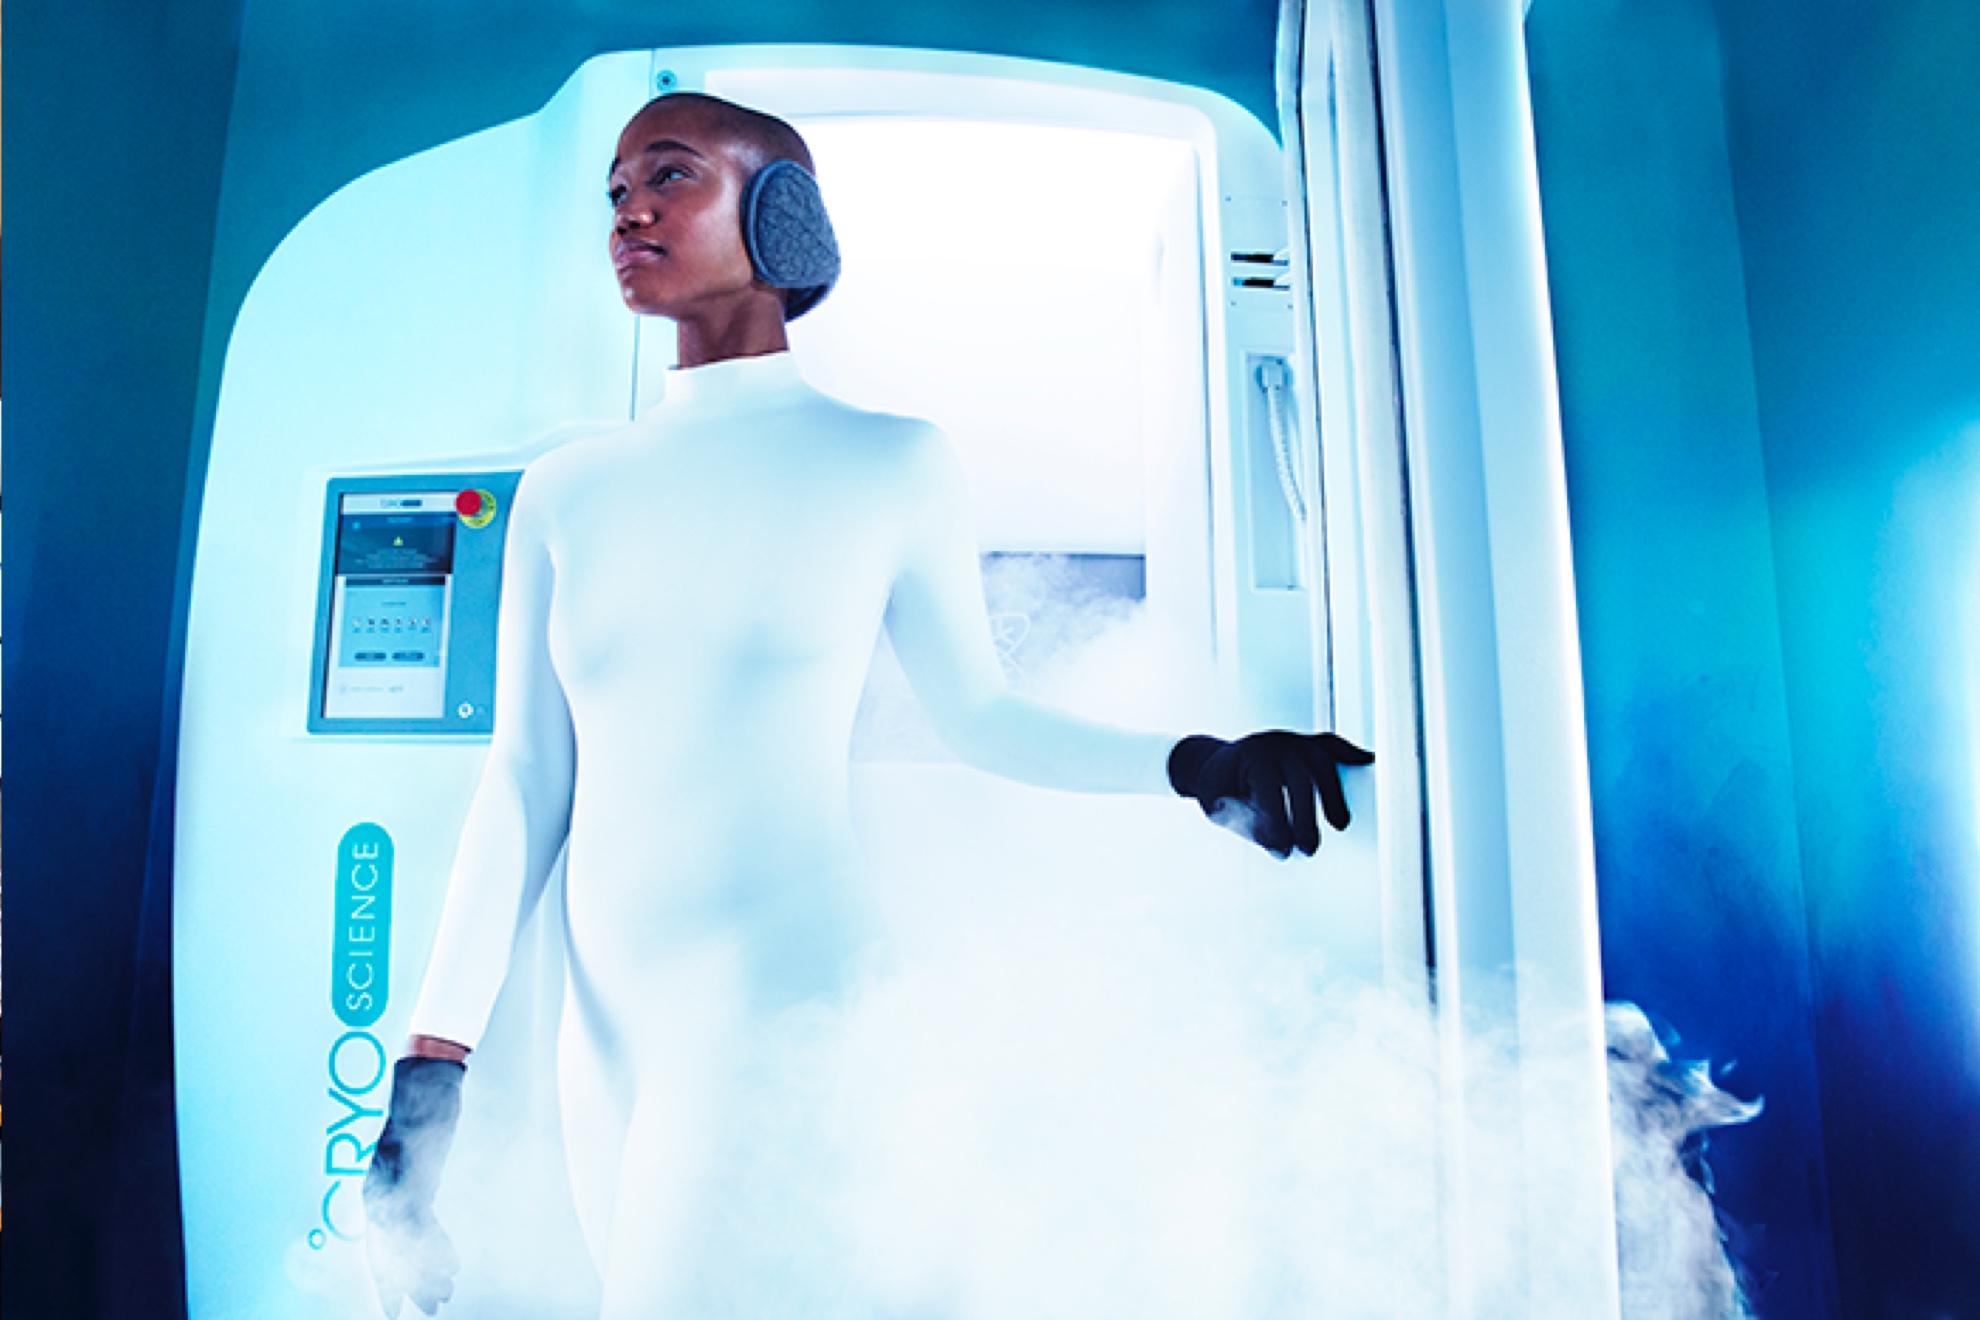 a woman in a futuristic white jumpsuit is walking out of a steam chamber